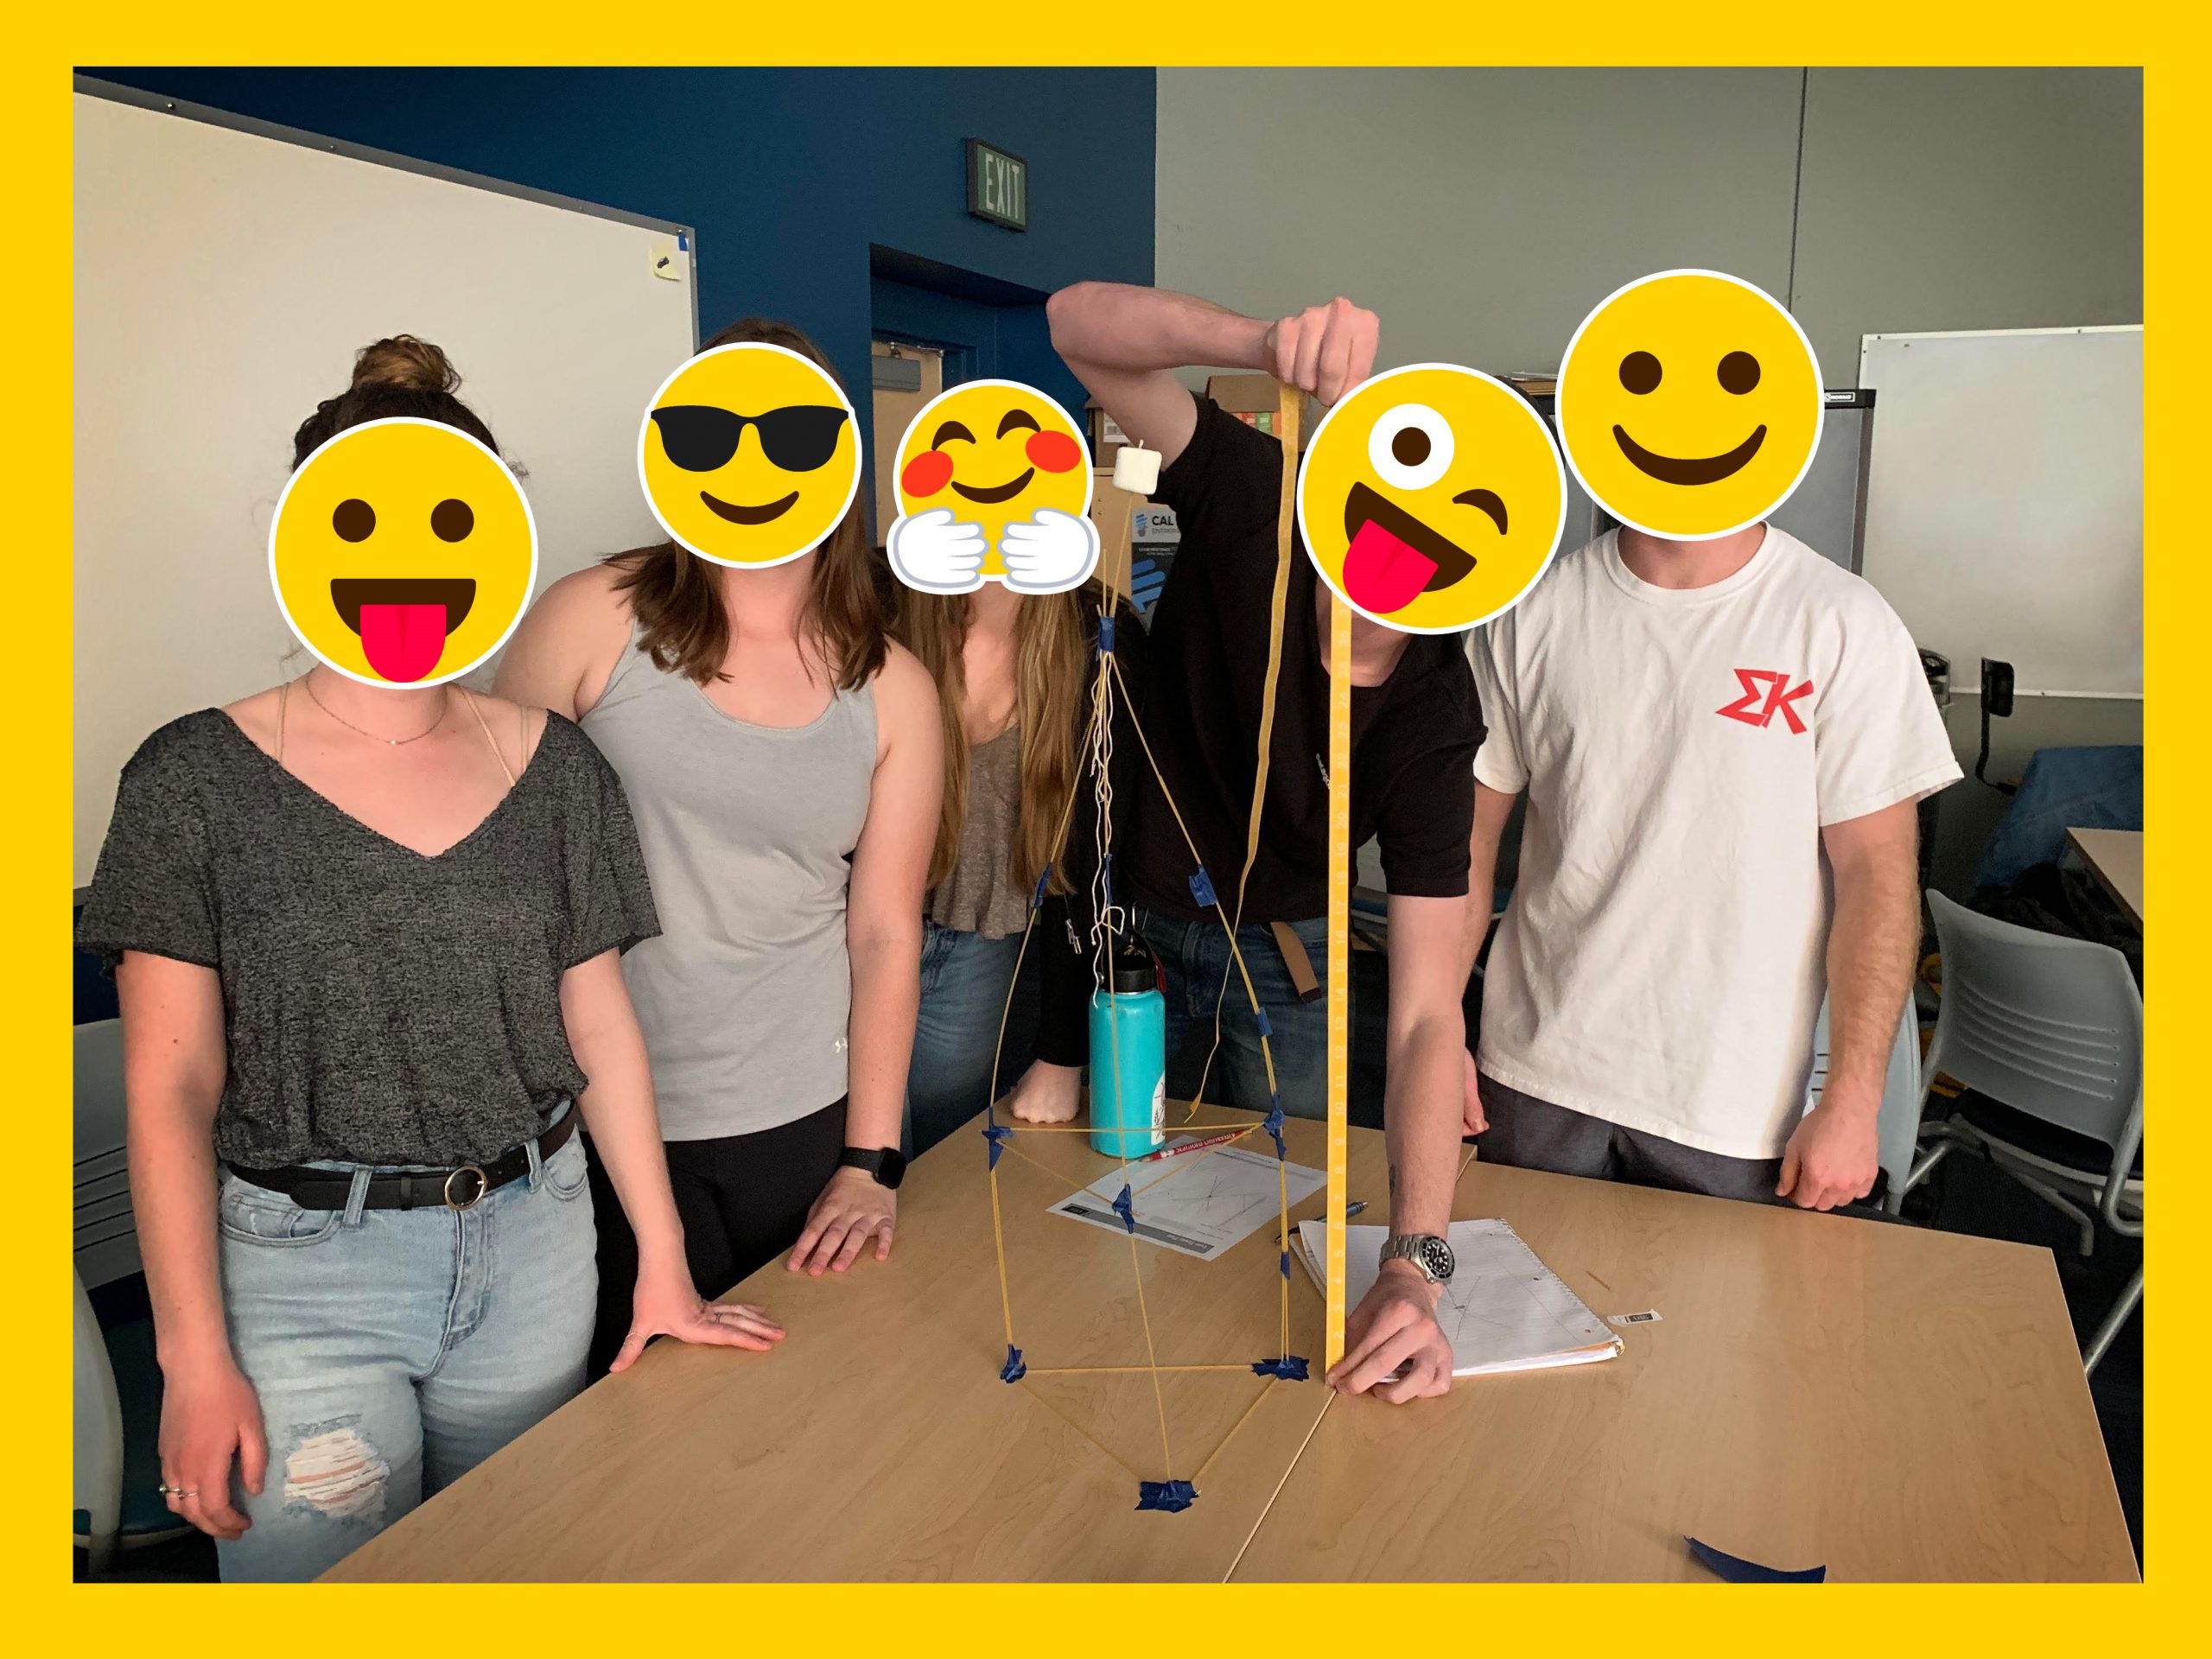 Students completing the marshmallow challenge by building a tower with string spaghetti and tape free standing structure